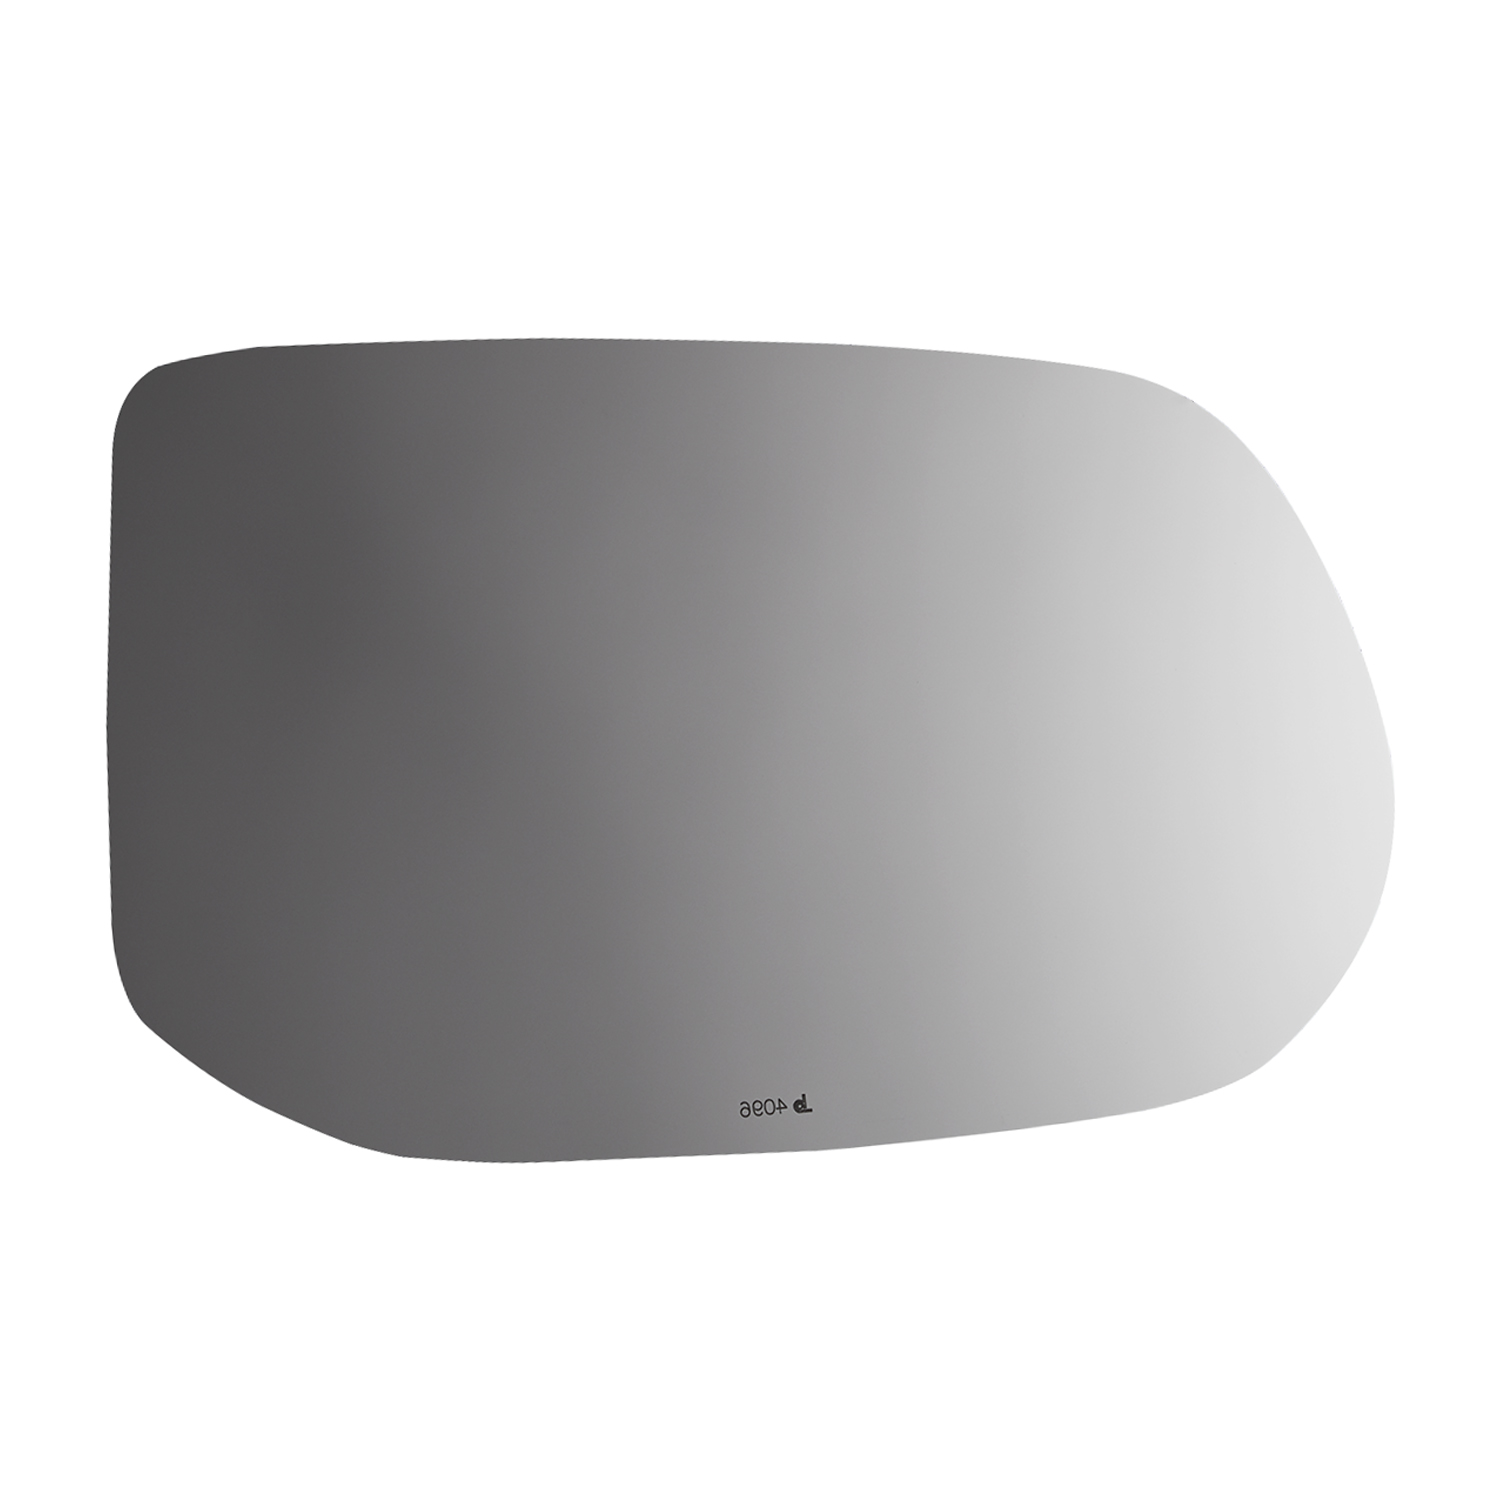 4096 SIDE VIEW MIRROR